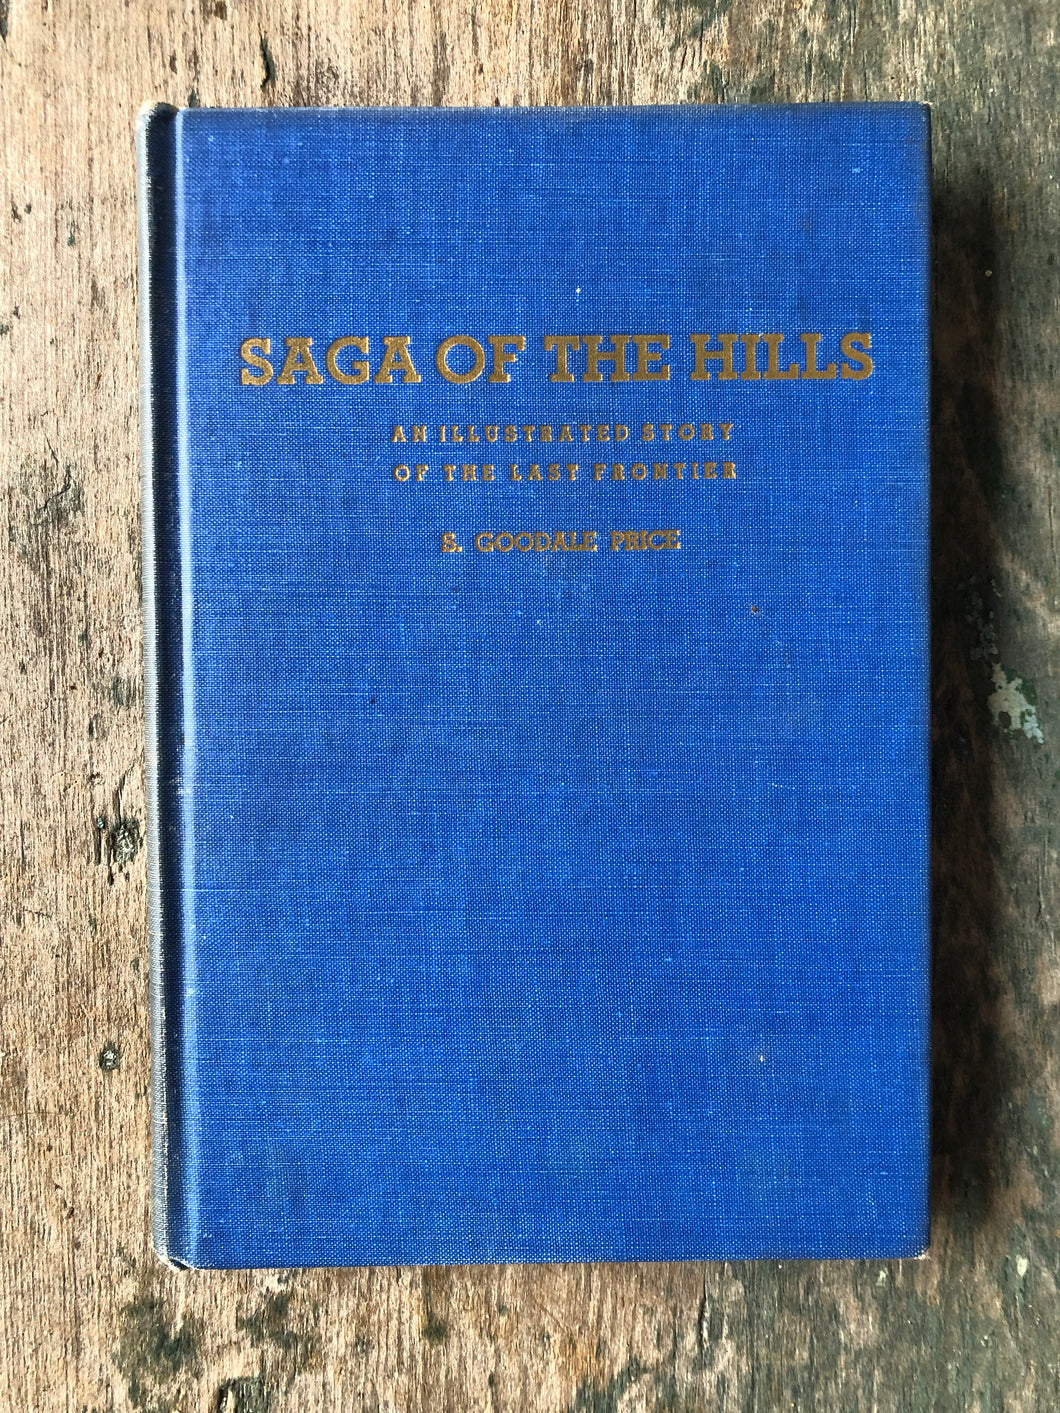 Saga of the Hills: An Illustrated Story of the Last Frontier Town. by S. Goodale Price